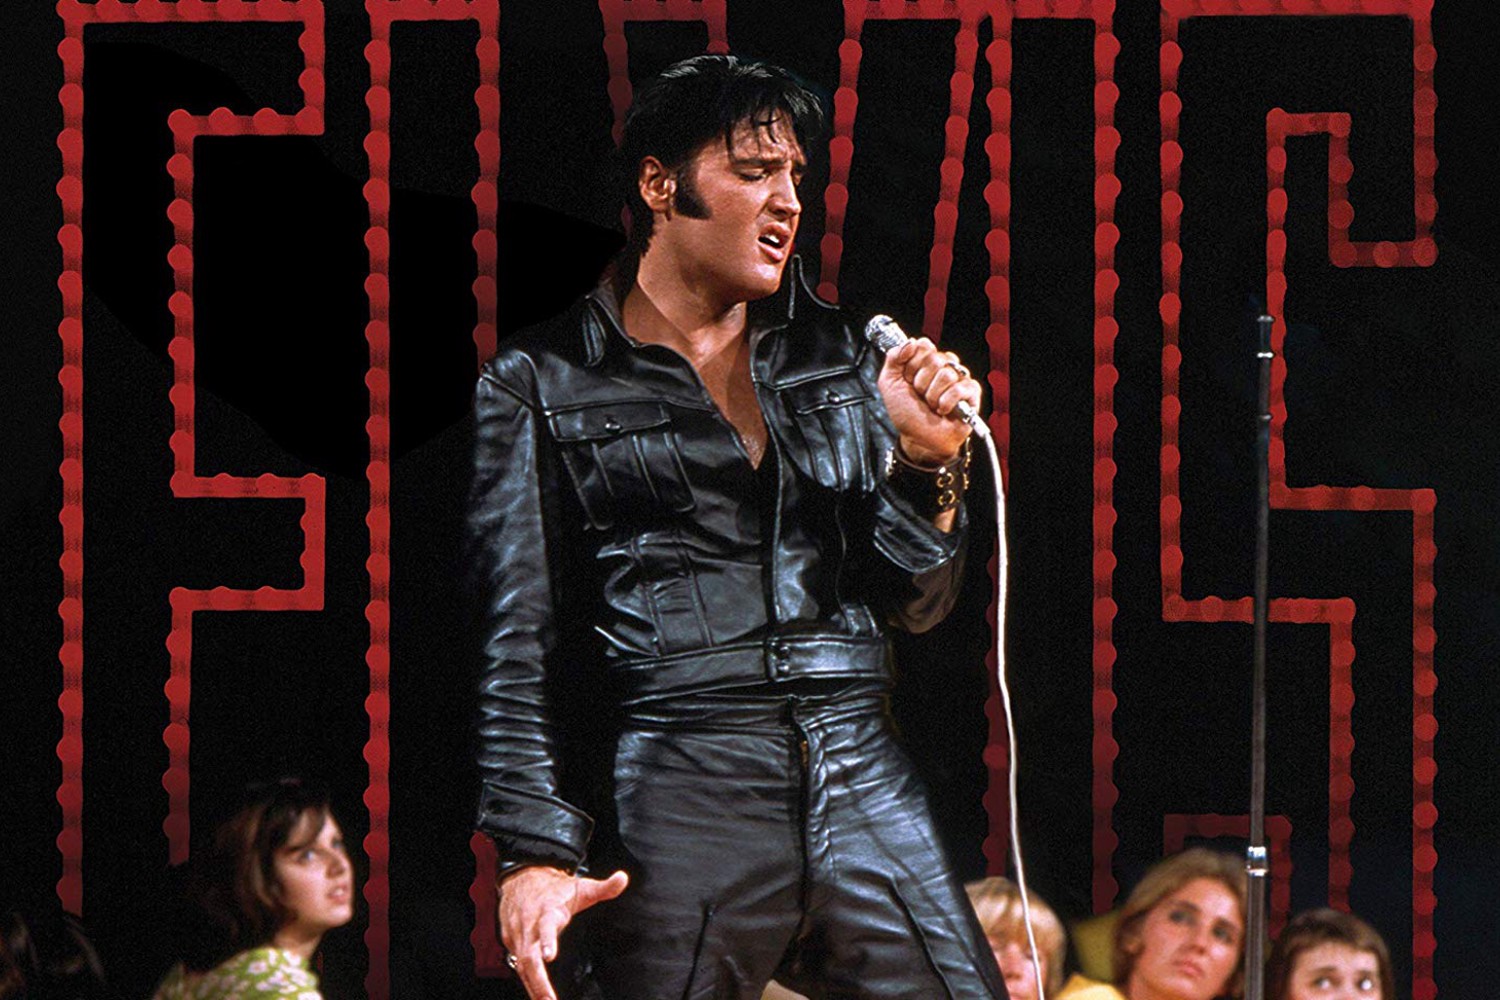 You got 8 out of 15! No One’s Got a Perfect Score on This General Knowledge Quiz (feat. Elvis Presley) — Can You?